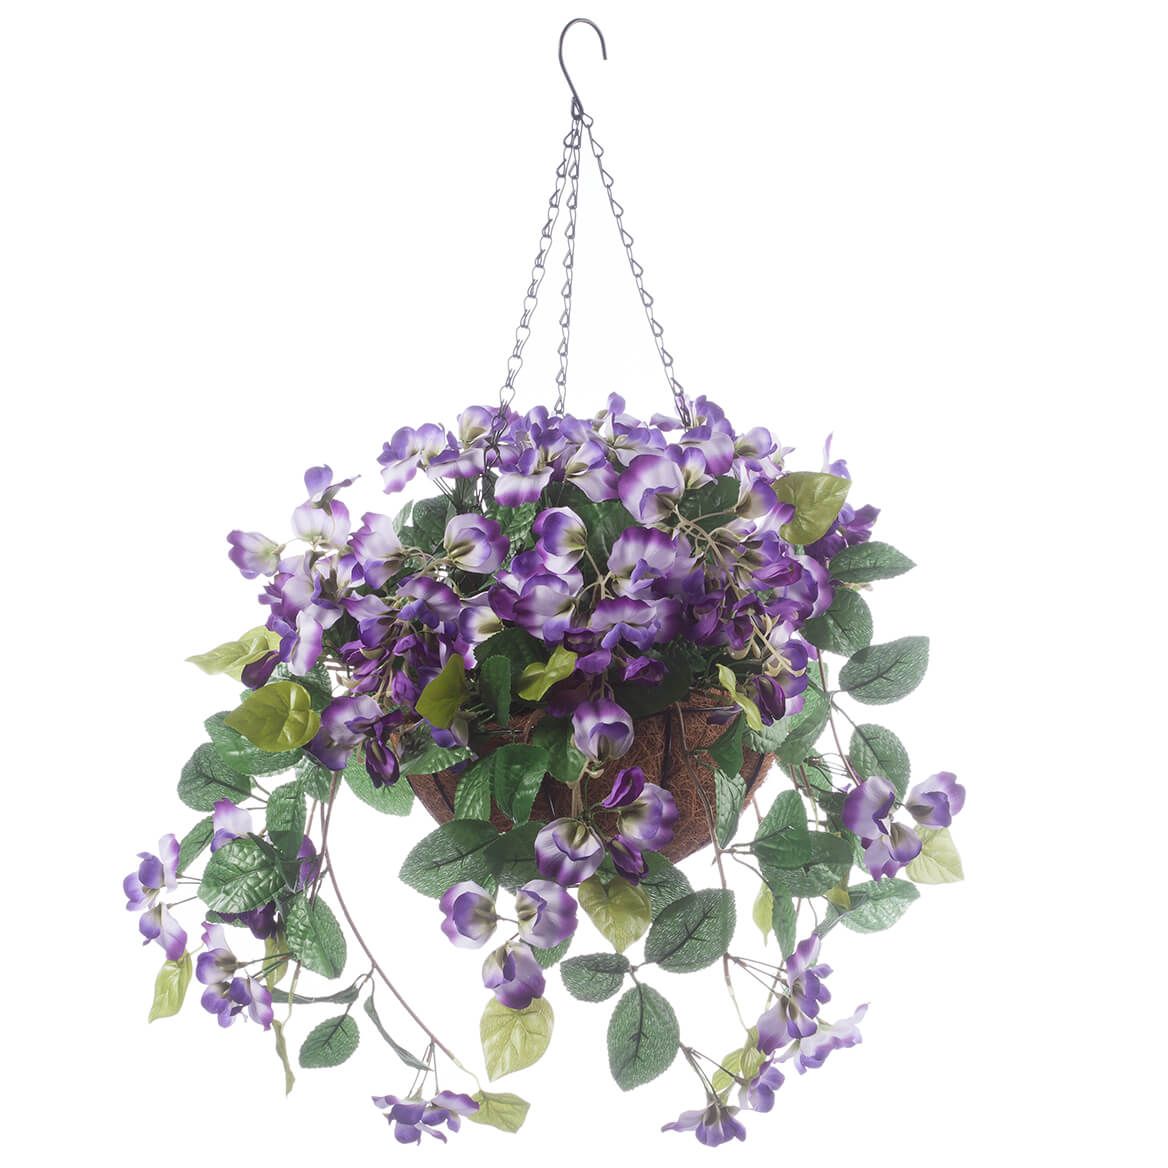 Fully Assembled Wisteria Hanging Basket by OakRidge™ + '-' + 366606